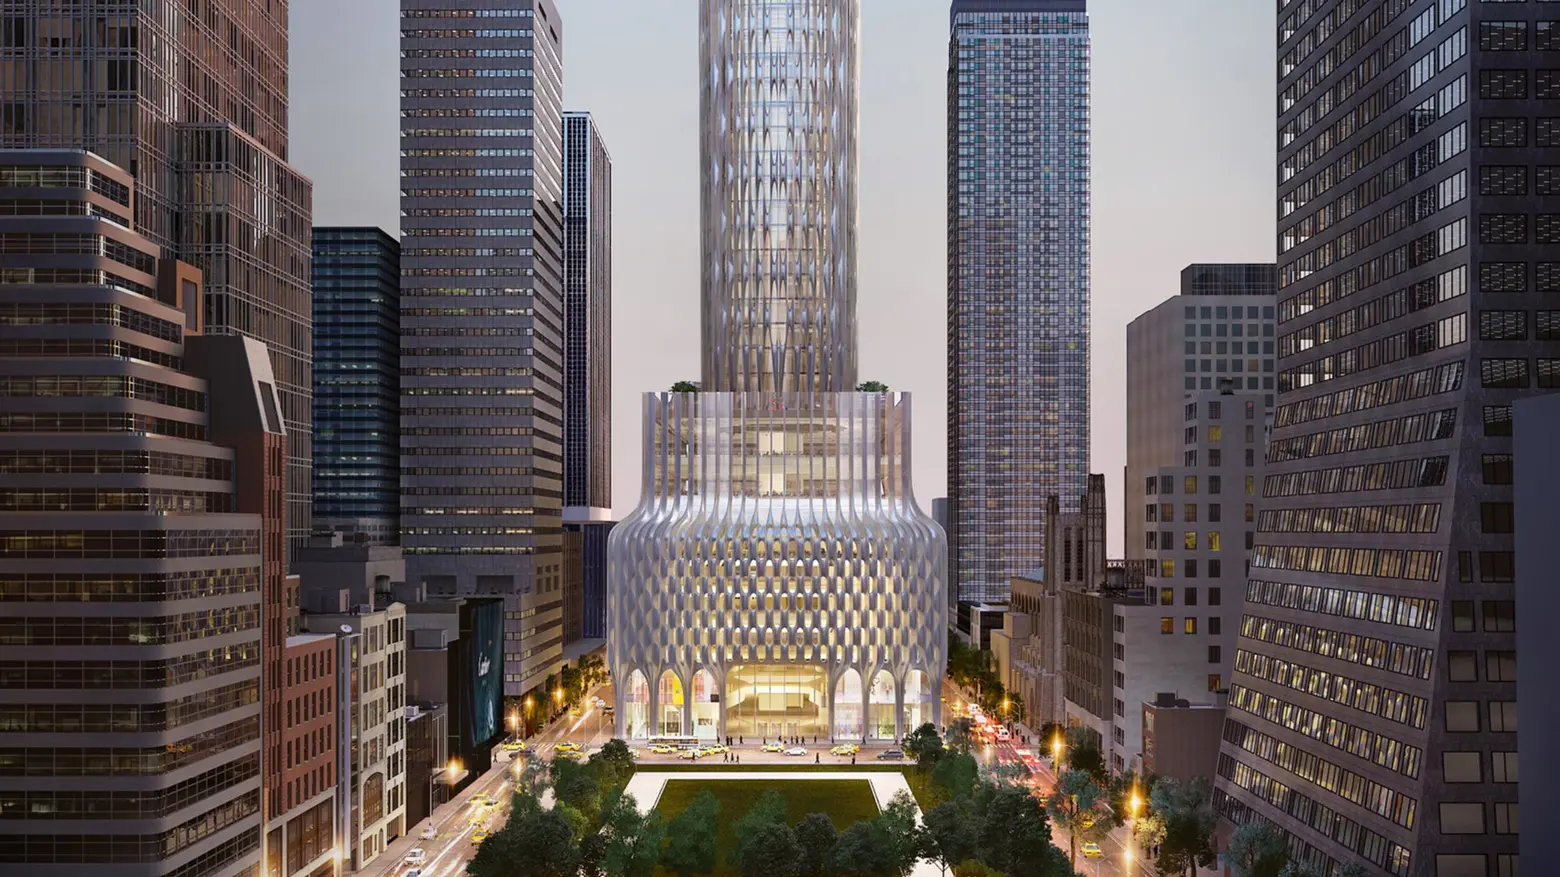 Kushner Cos. vision for 666 Fifth Avenue has Zaha Hadid design and $12B ambitions